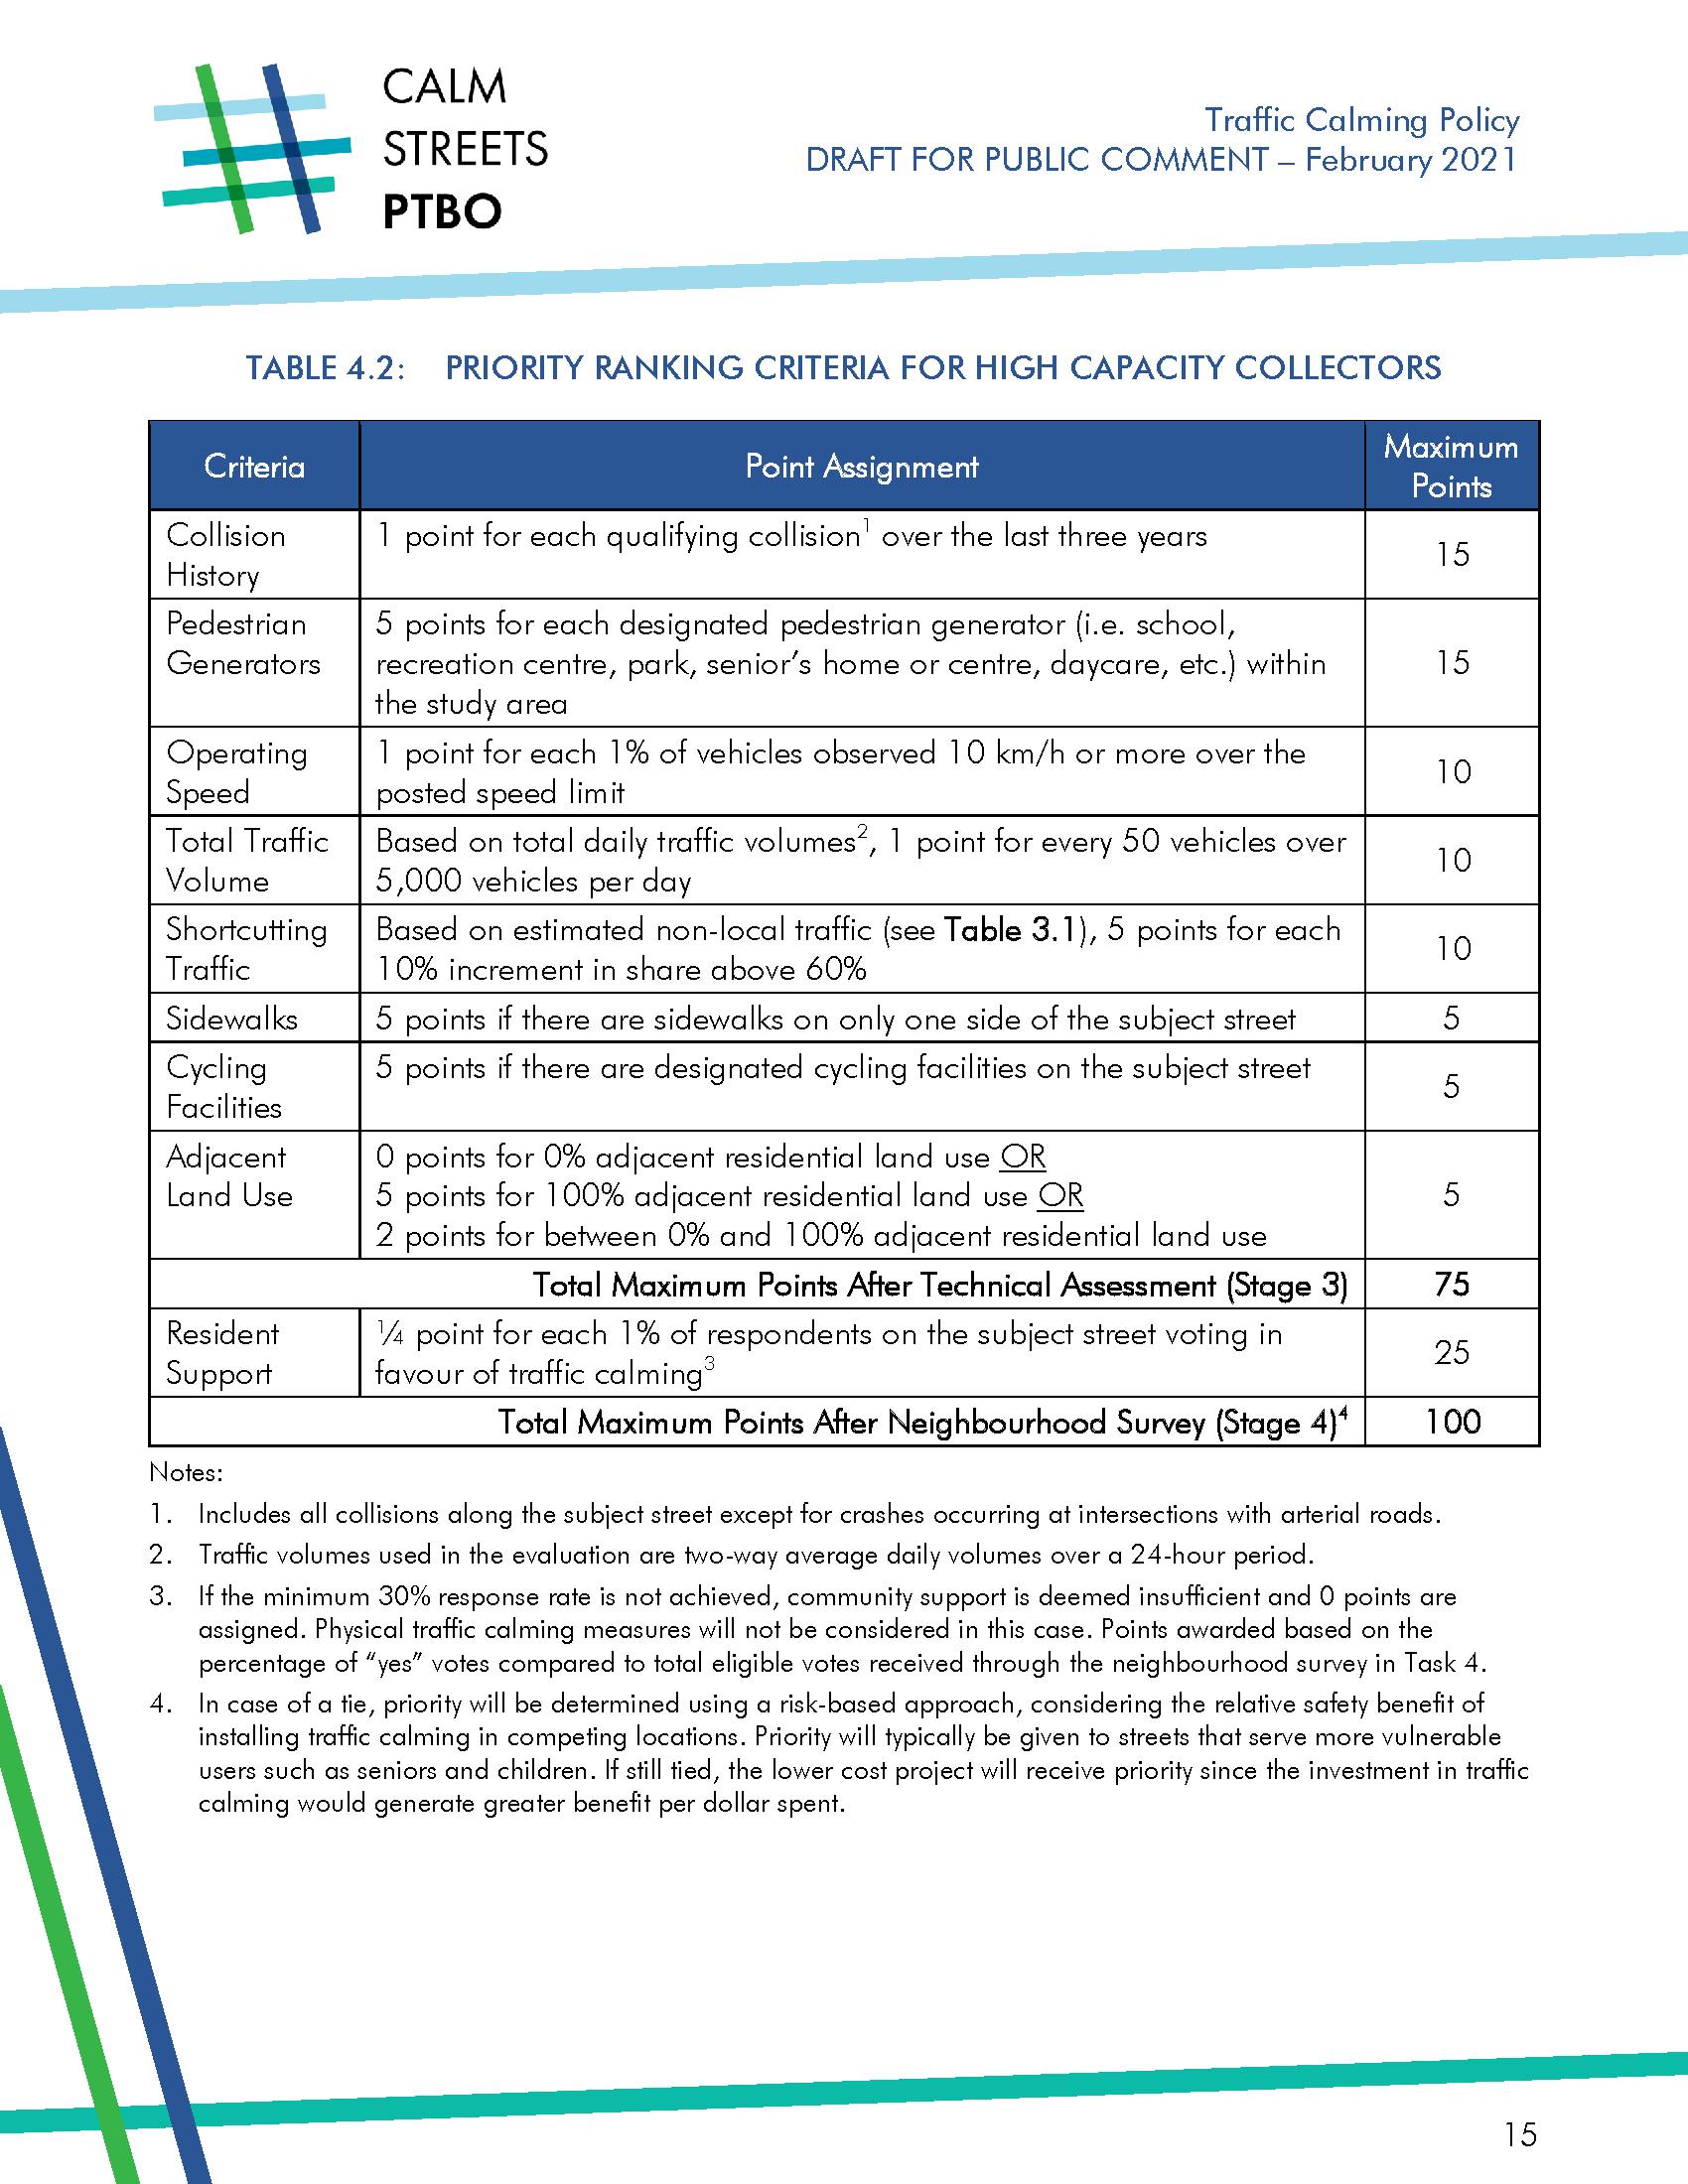 Draft Traffic Calming Policy - High Capacity Collector Priority Ranking Criteria